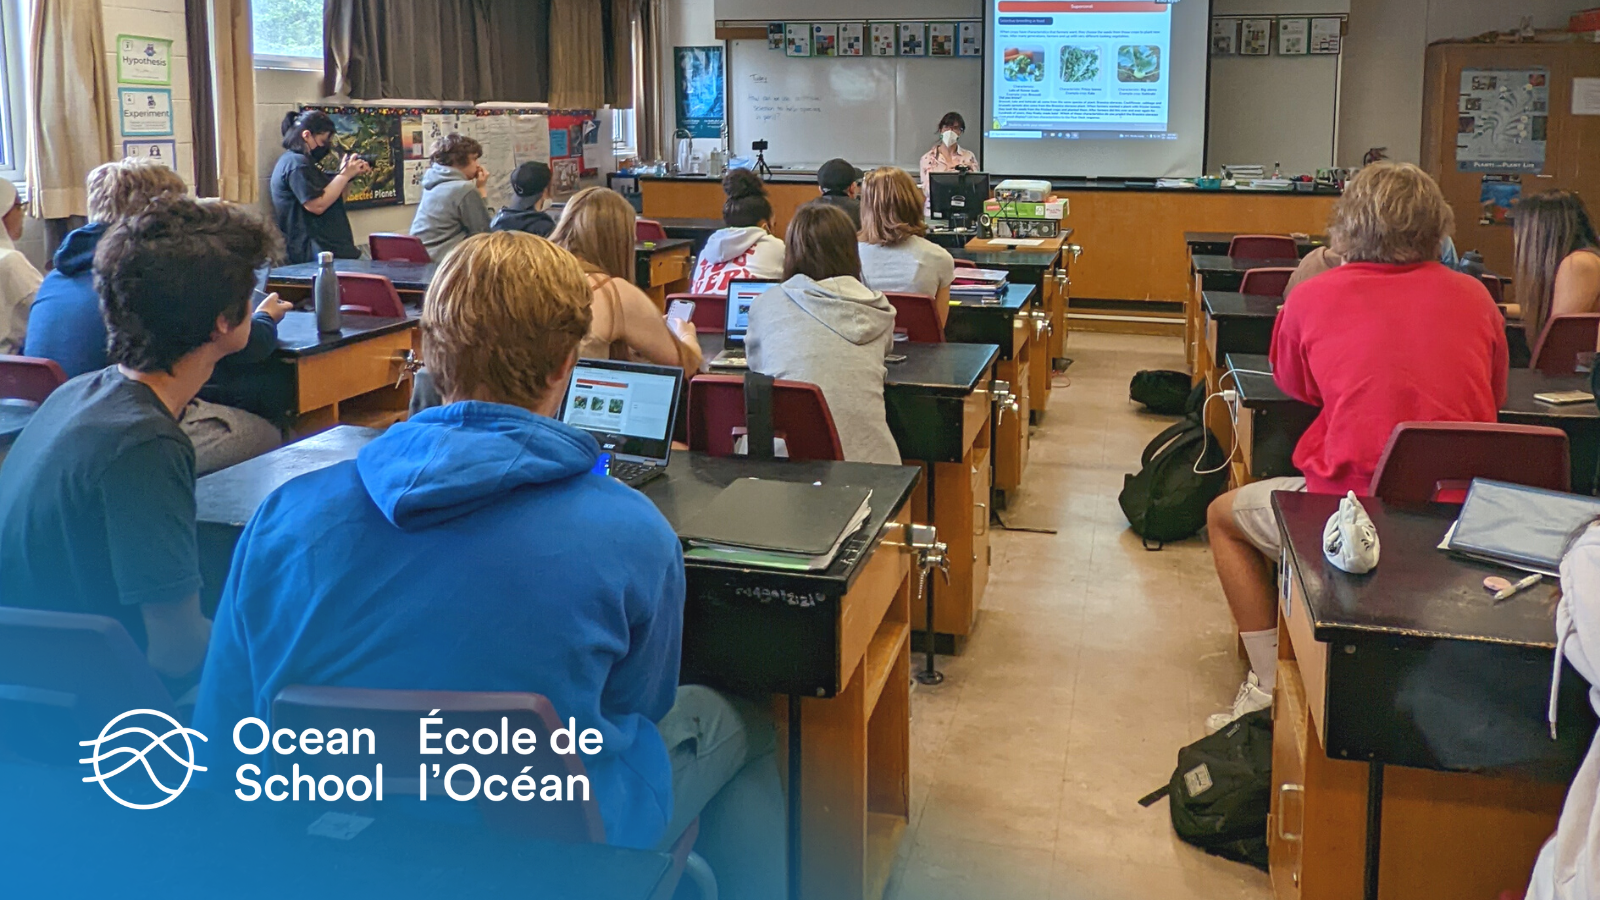 A teacher gives a lesson in front of a classroom of teenagers. On a projector screen at the front of the classroom, an Ocean School activity is shown.